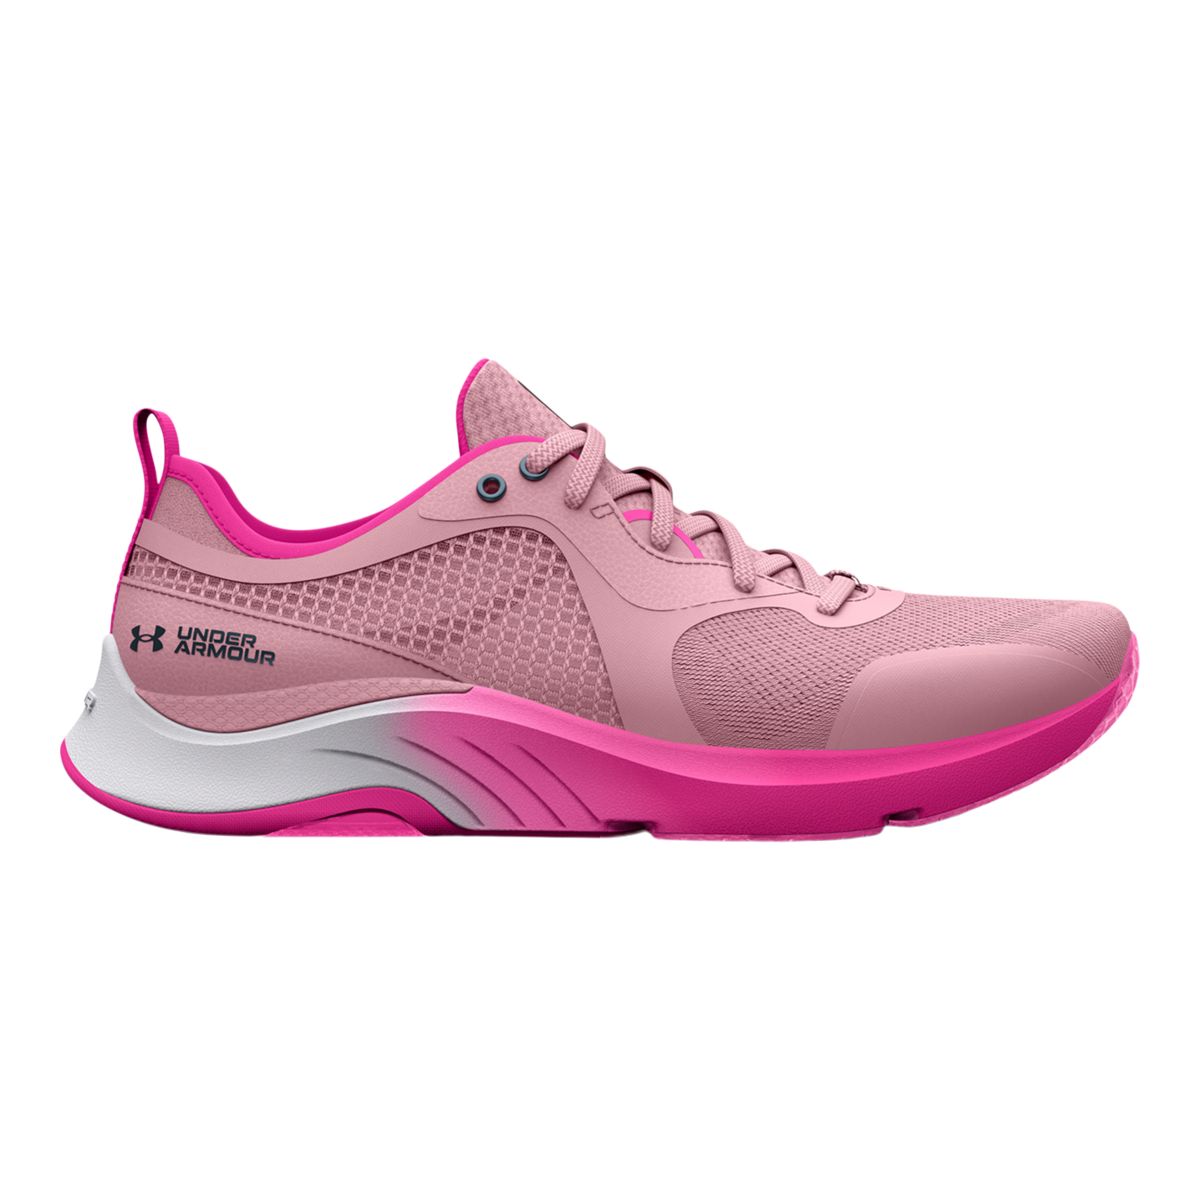 Image of Under Armour Women's Omnia Training Shoes